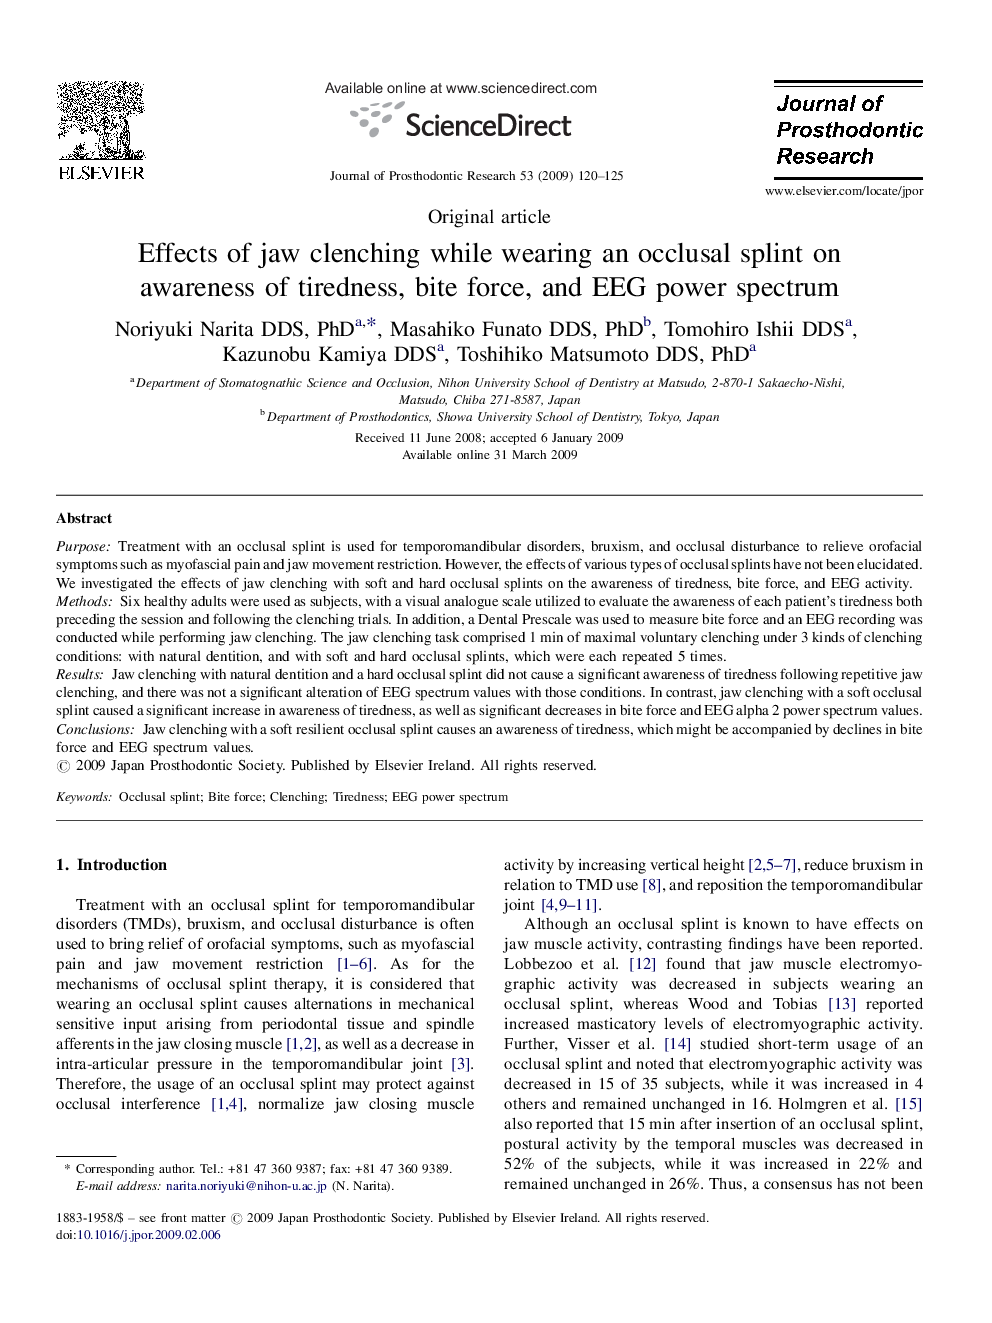 Effects of jaw clenching while wearing an occlusal splint on awareness of tiredness, bite force, and EEG power spectrum